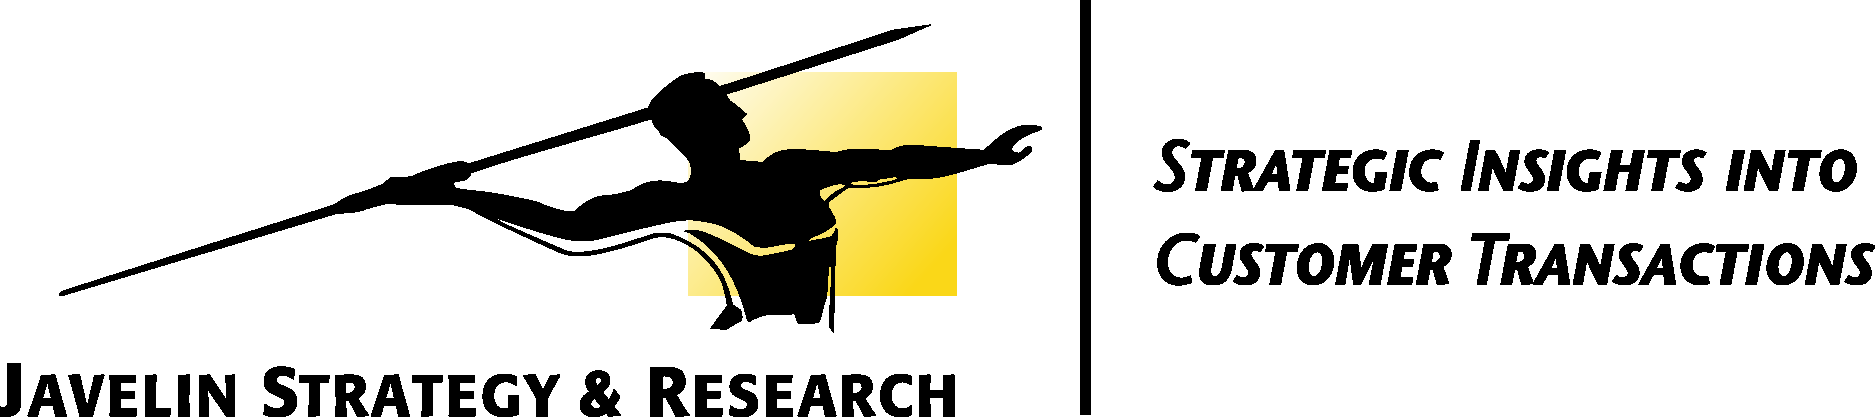 Javelin Strategy & Research Logo Vector